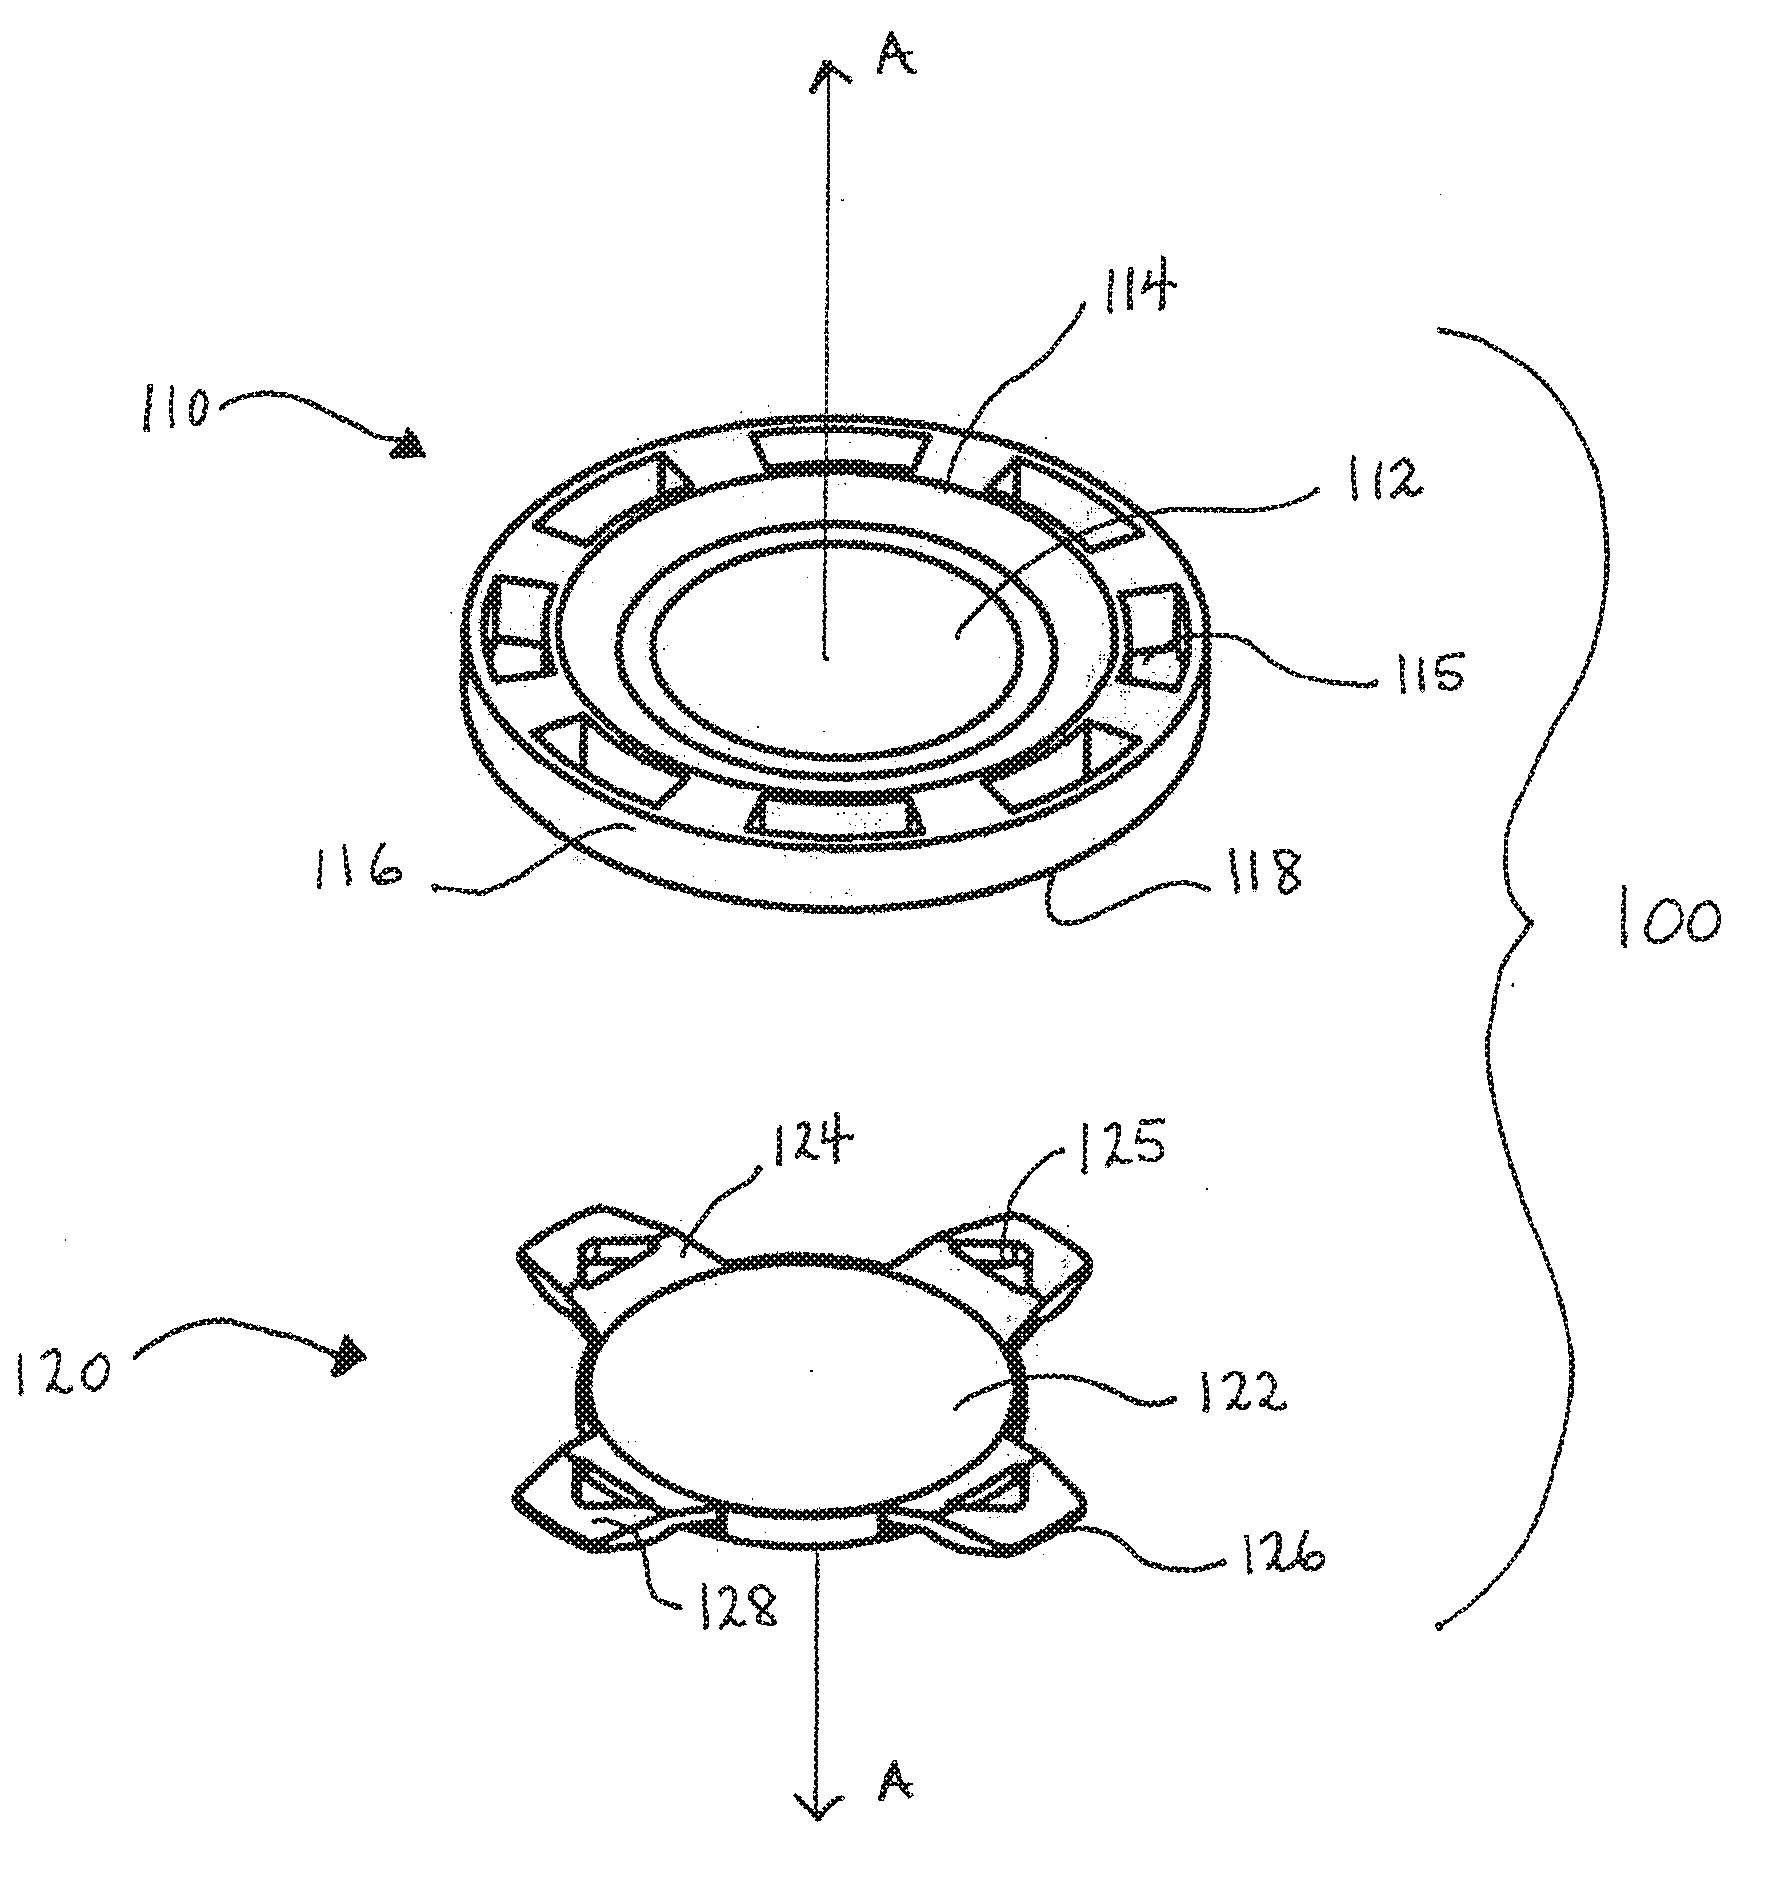 Two-part accommodating intraocular lens device